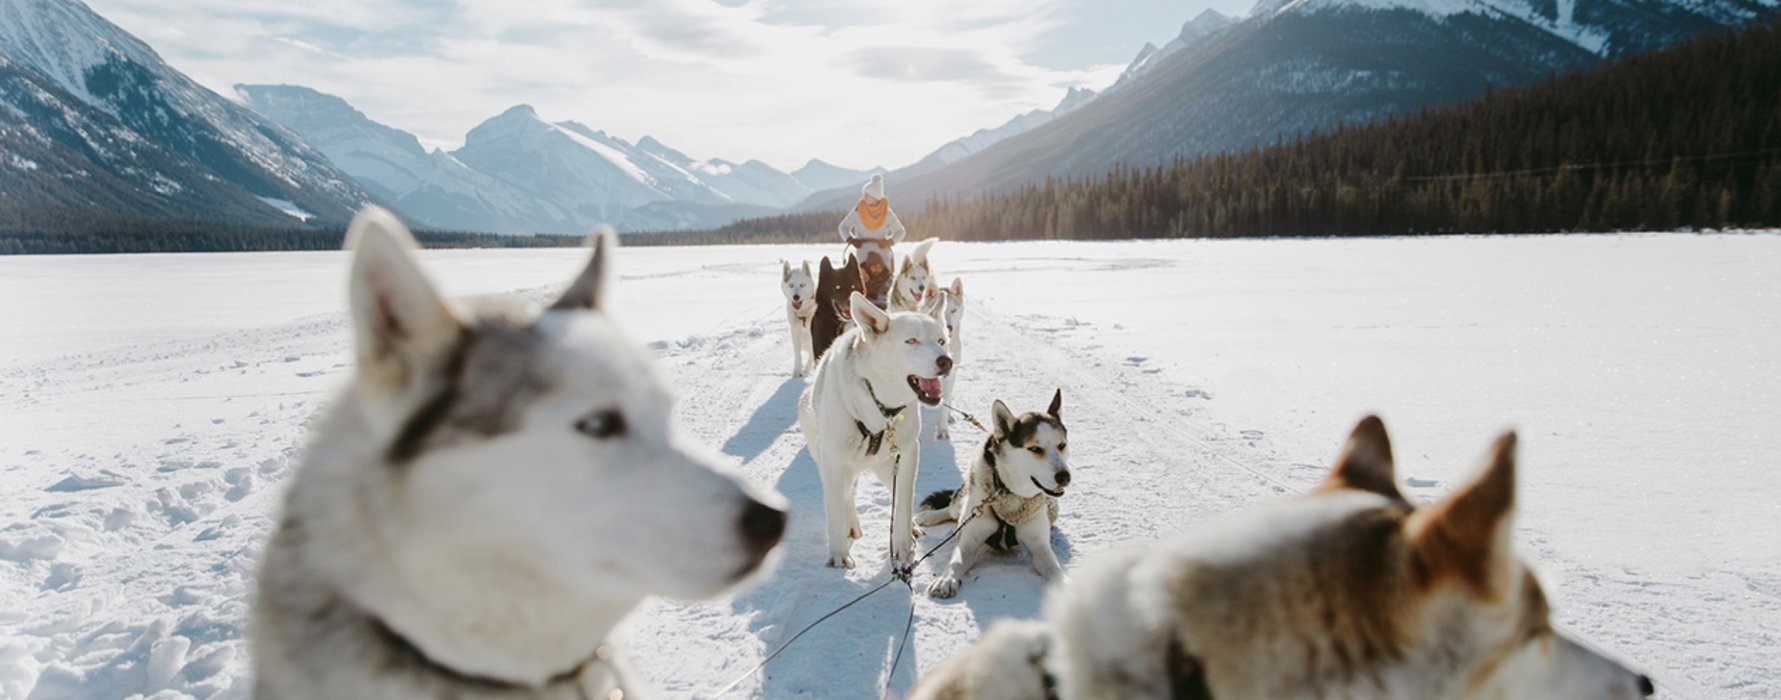 Group of visitors dogsledding with Snowy Owl Dogsled Tours in Spray Lakes.